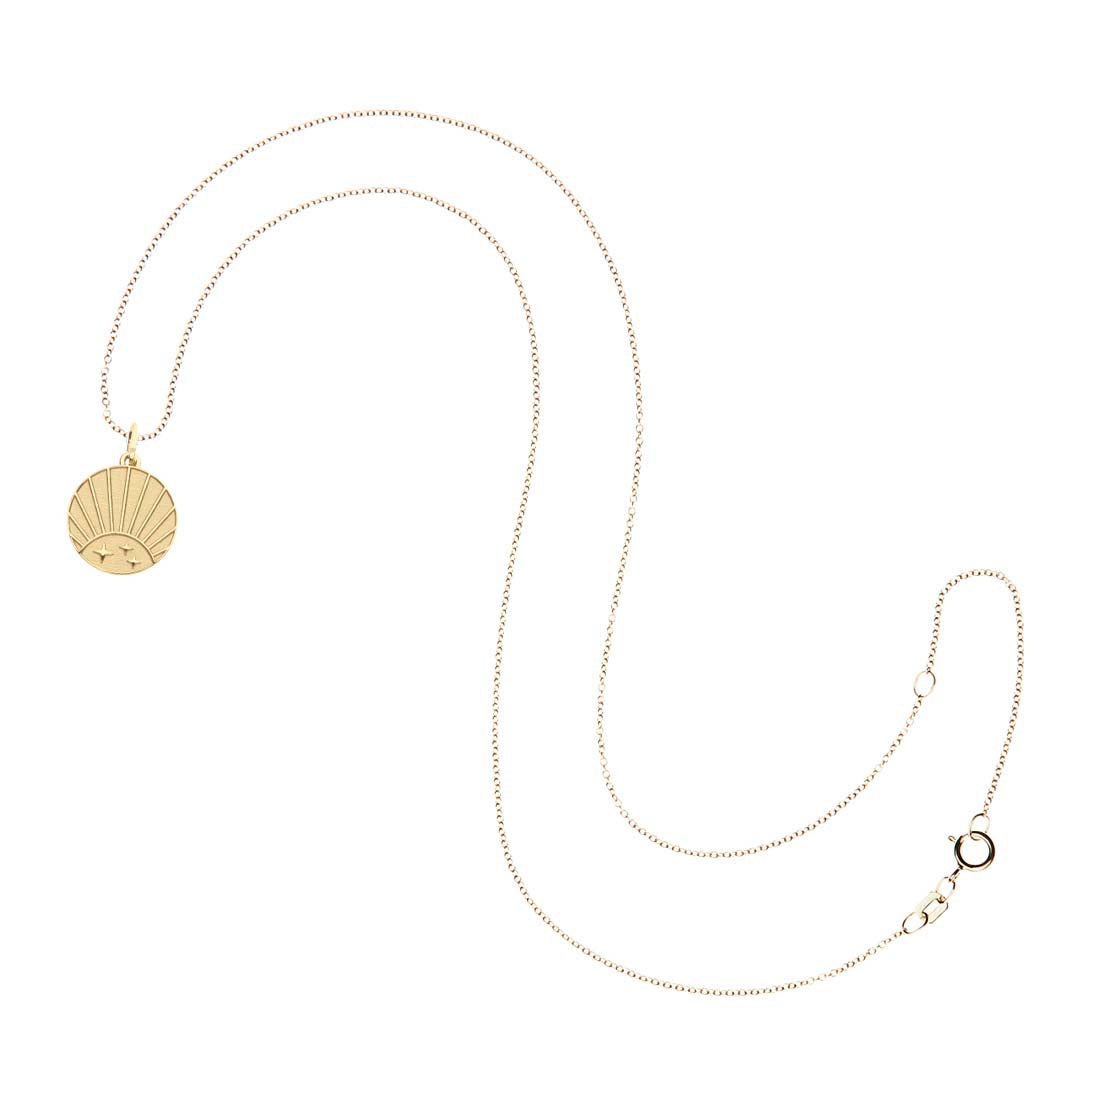 STRONG Rising Sun Engravable Charm in Solid Gold